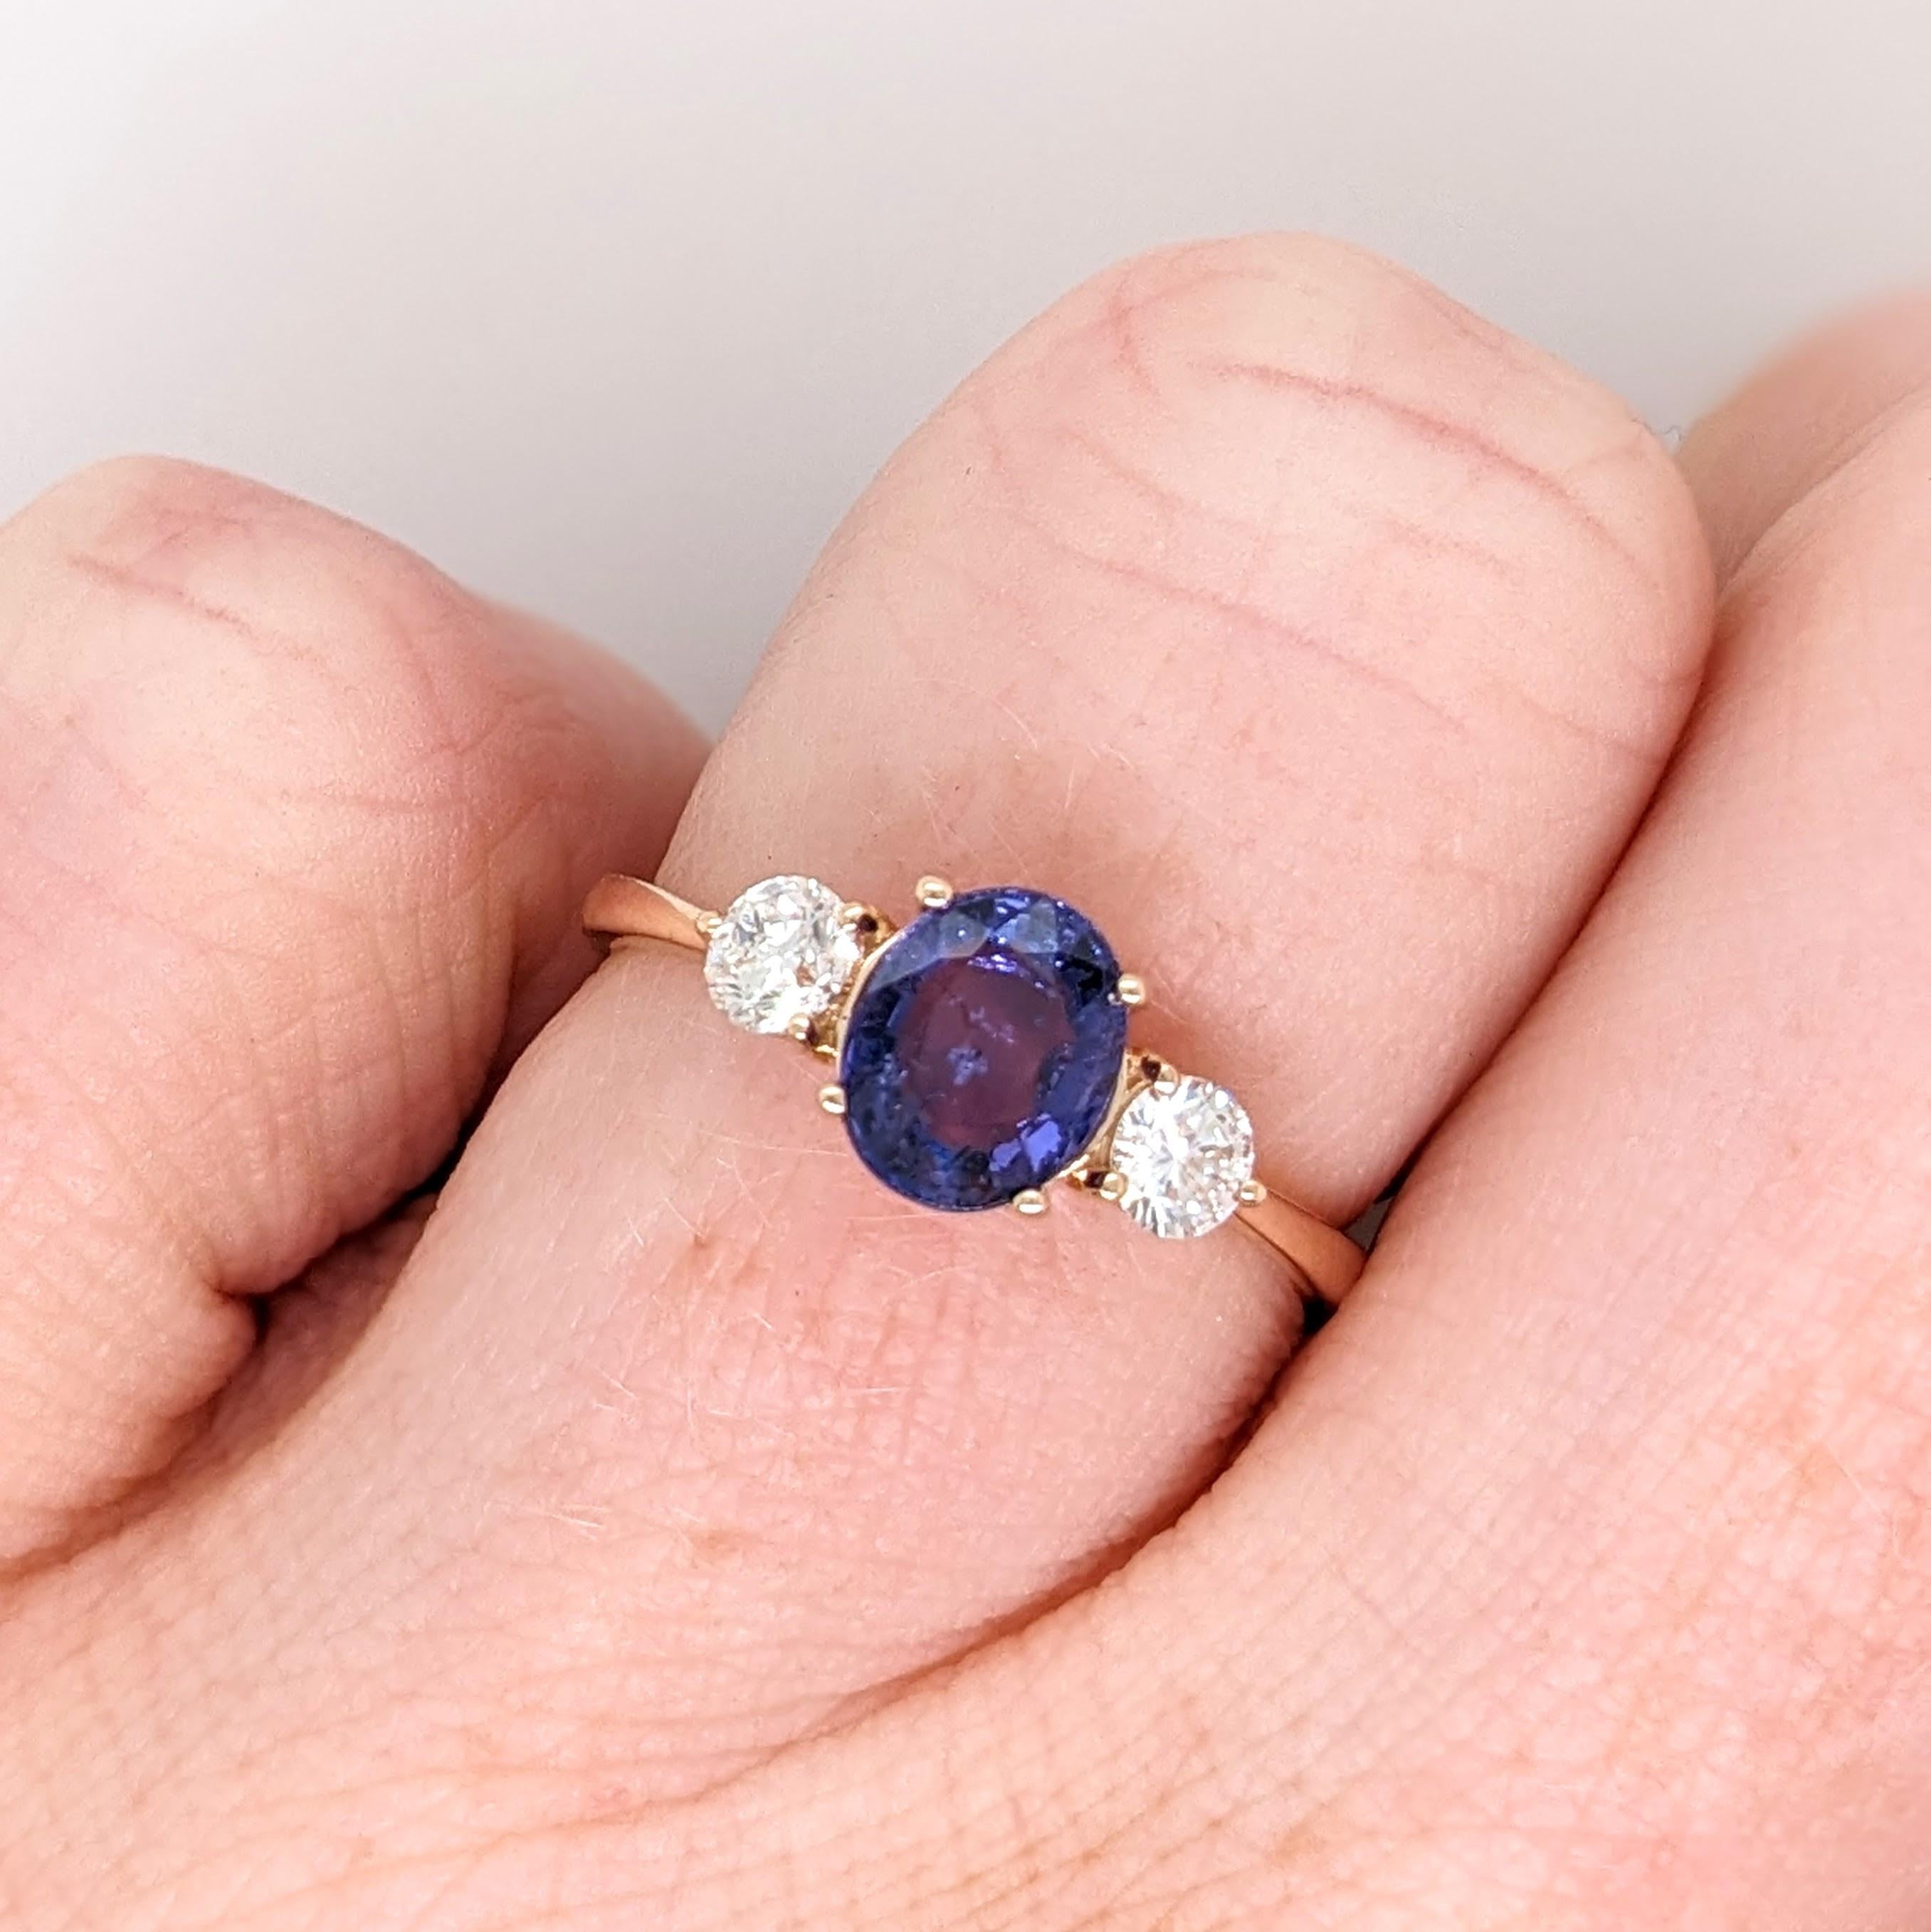 Women's 1.5ct Purple Sapphire Ring w Natural Diamonds in Solid 14K Gold Oval 6x4mm